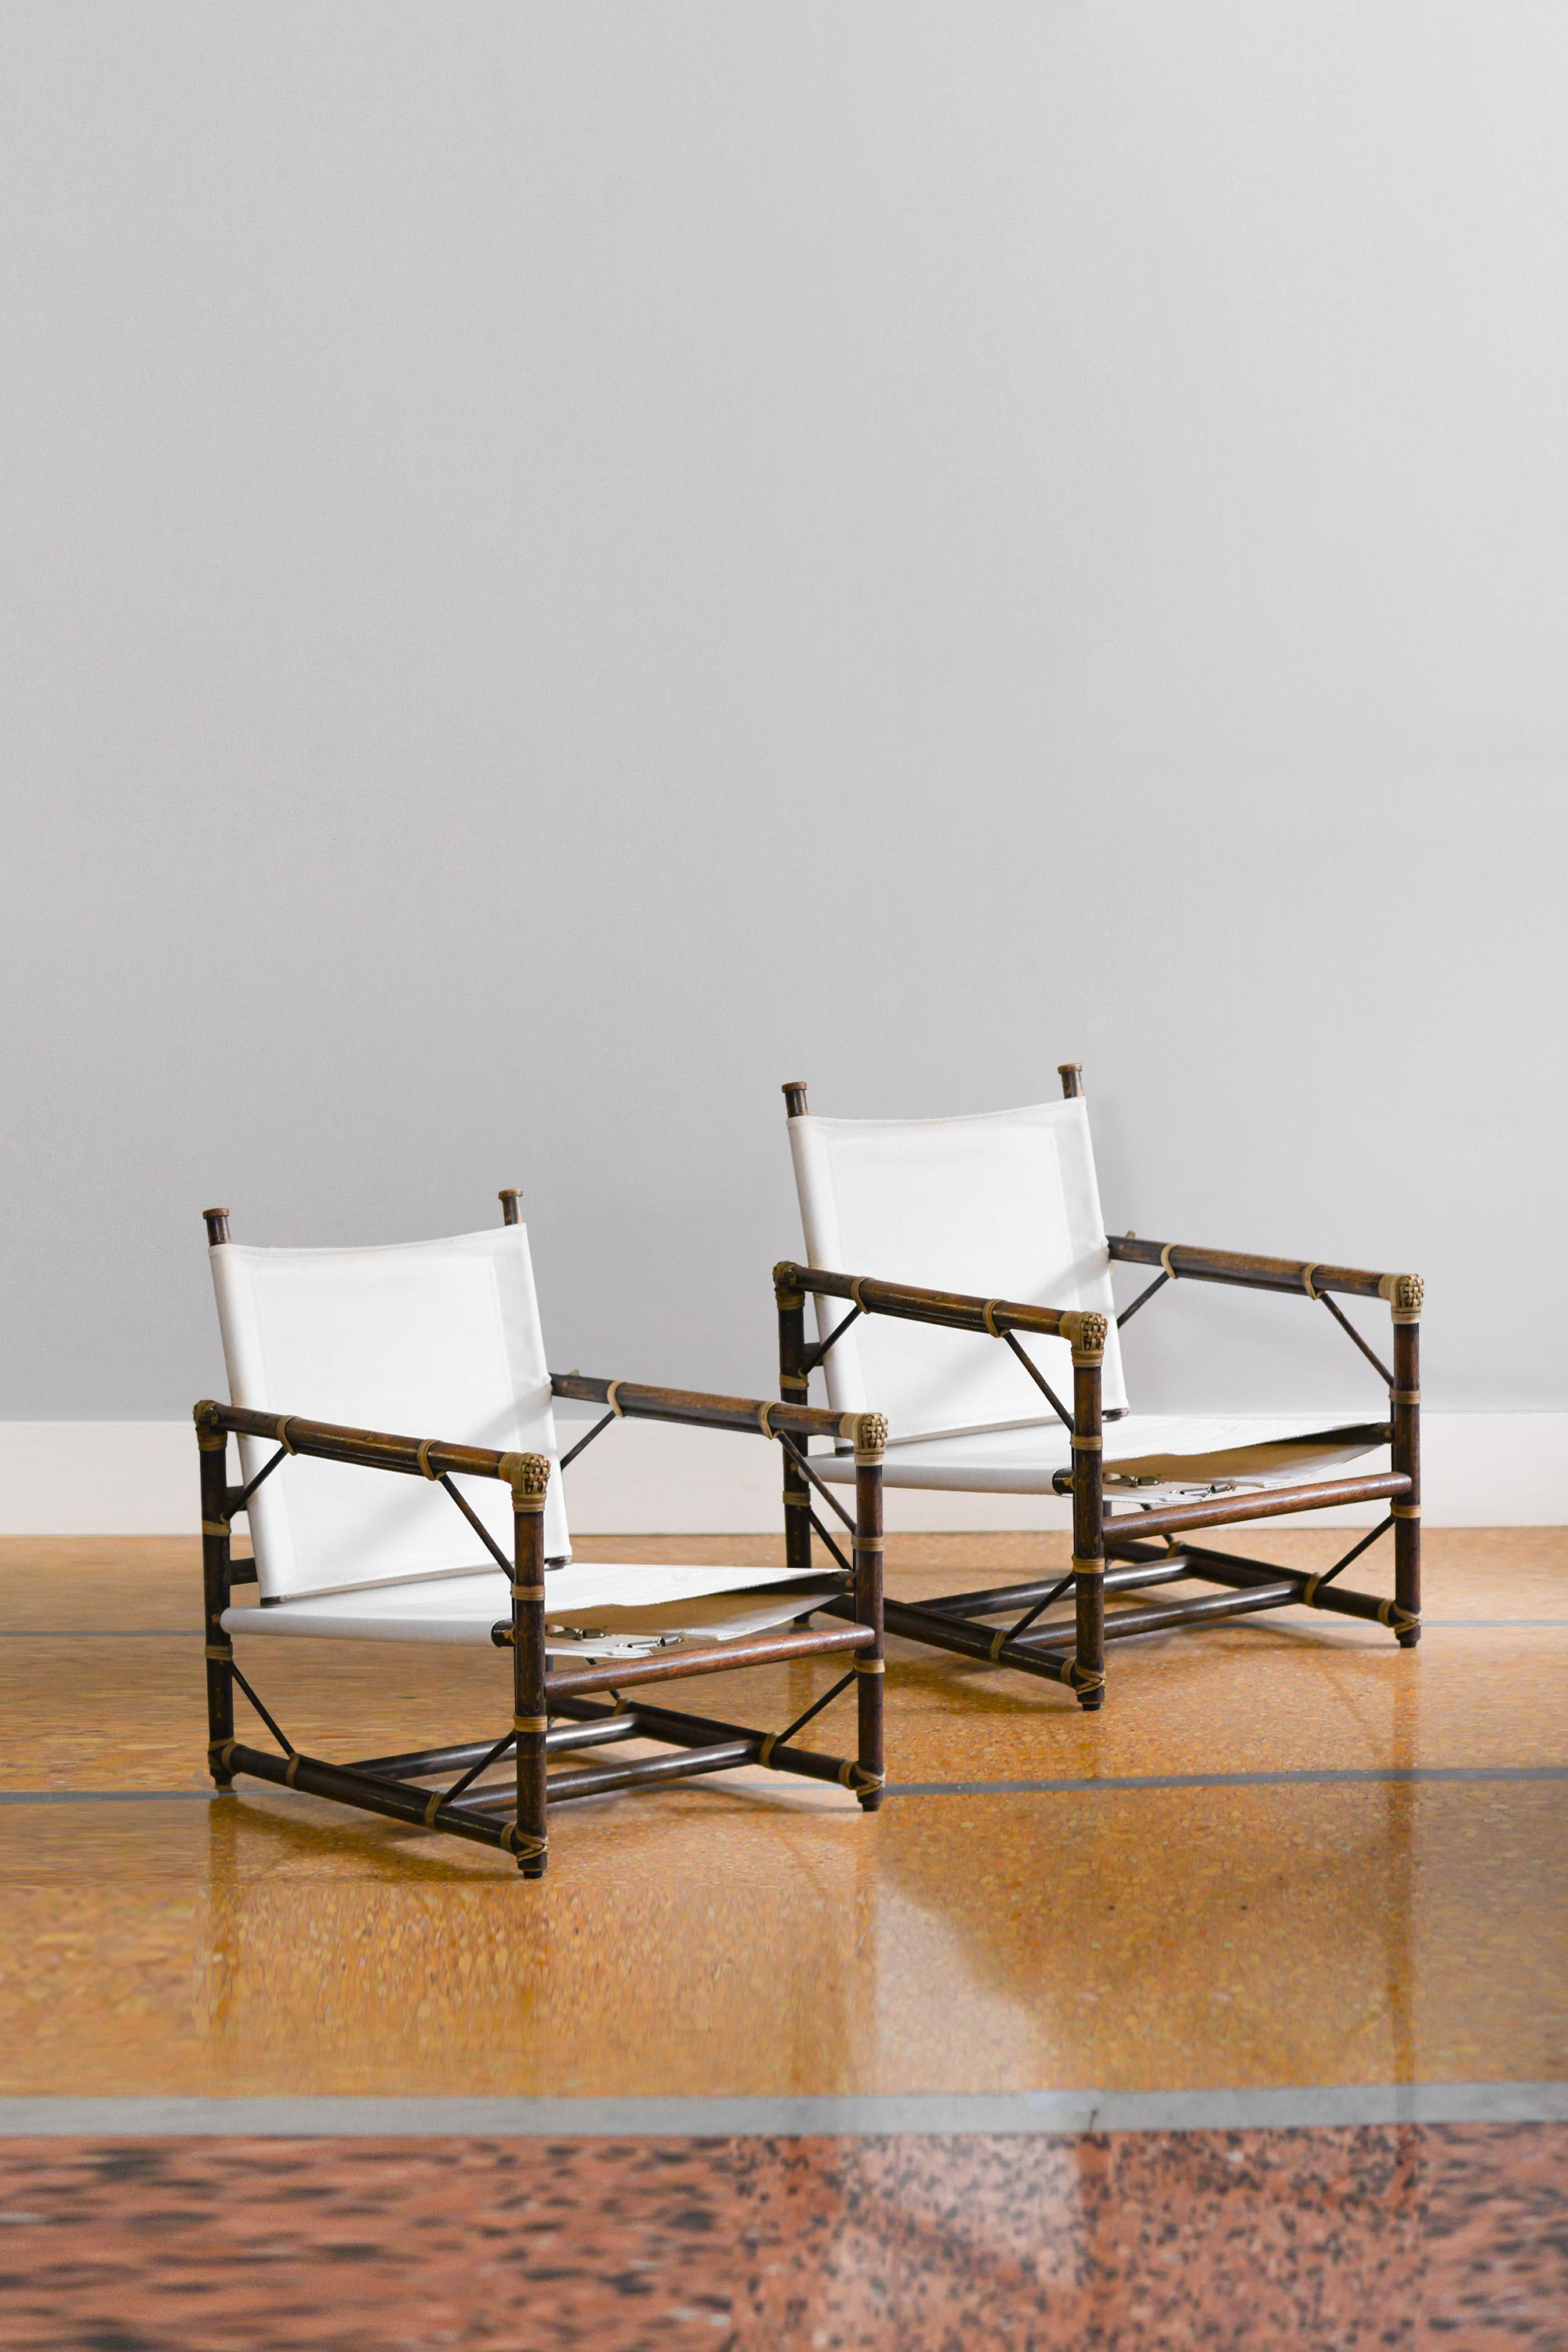 Pair of armchairs #McGuire San Francisco 1970
Product details
Made of wood and fabric, with leather bindings.
Dimensions: 63w x 78h x72d cm
Production: McGuire, San Francisco 1970.